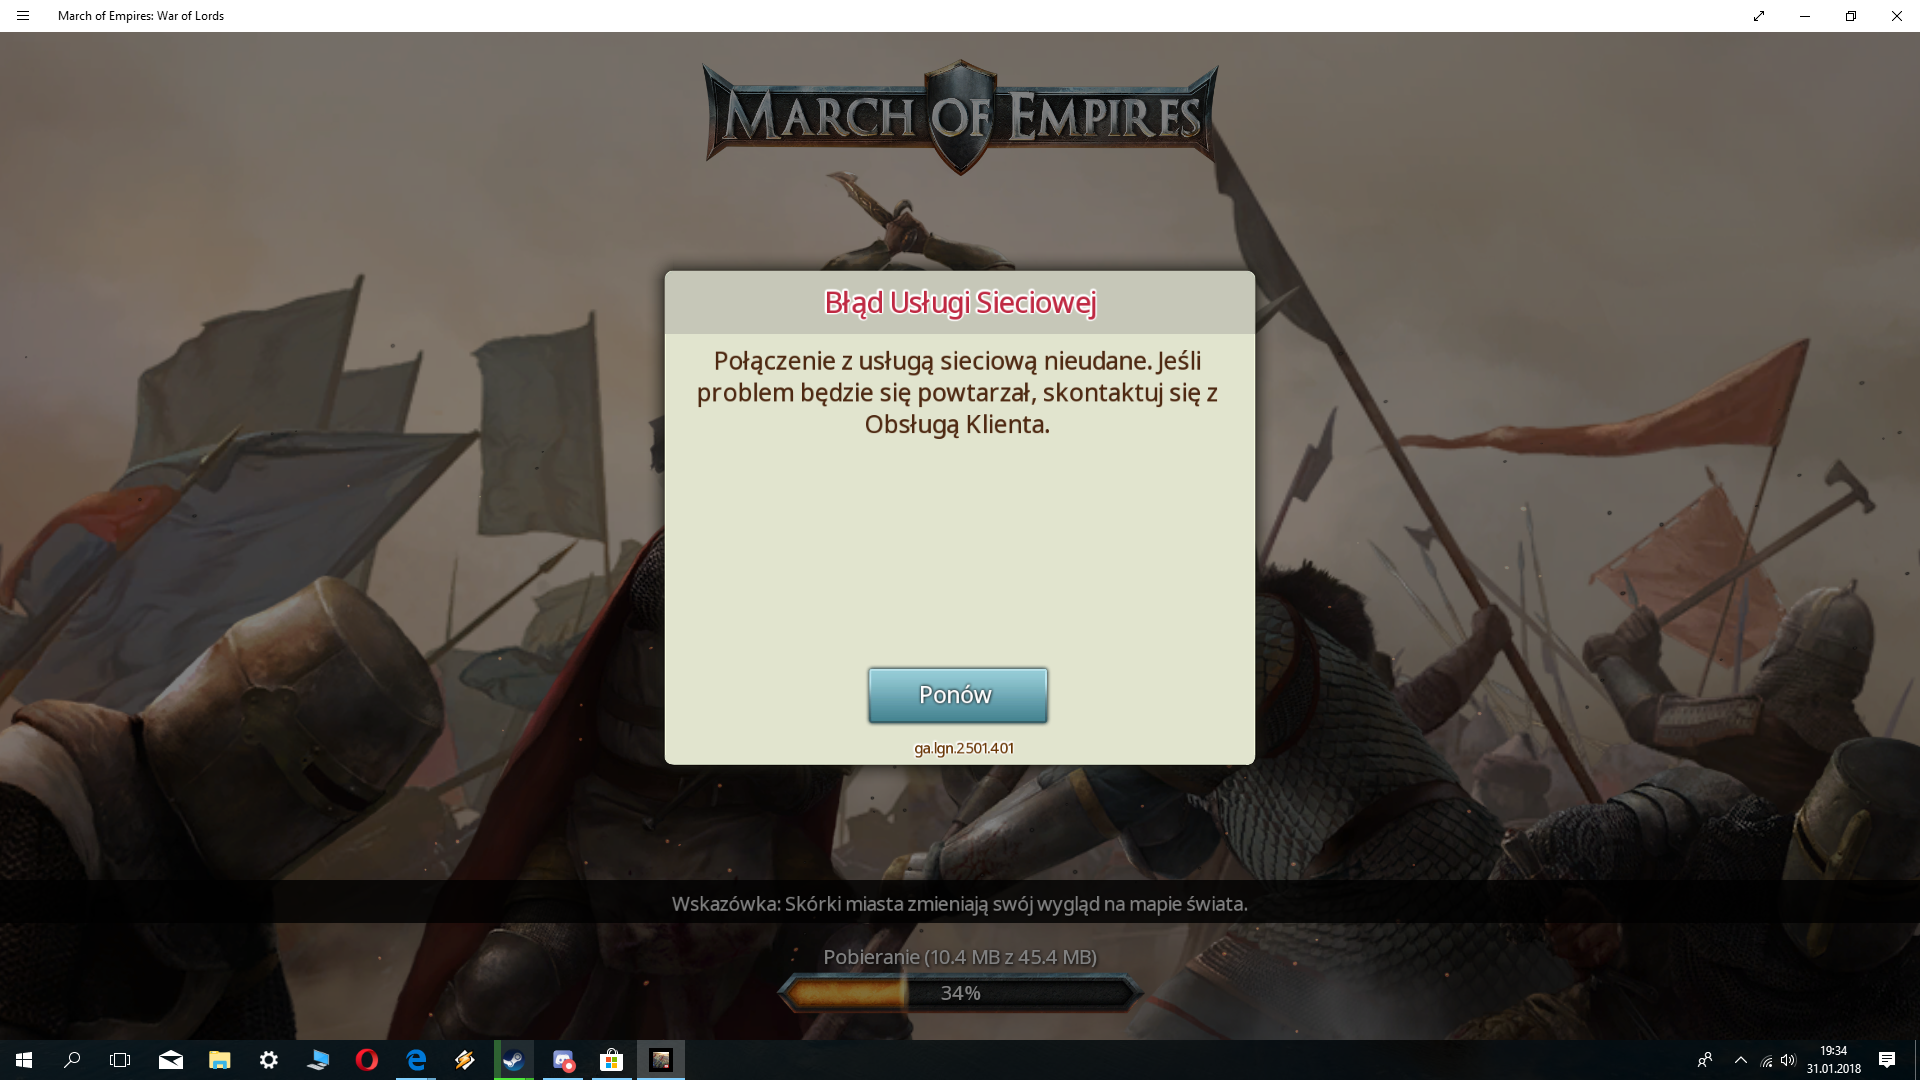 march of empires war of lords installed itself